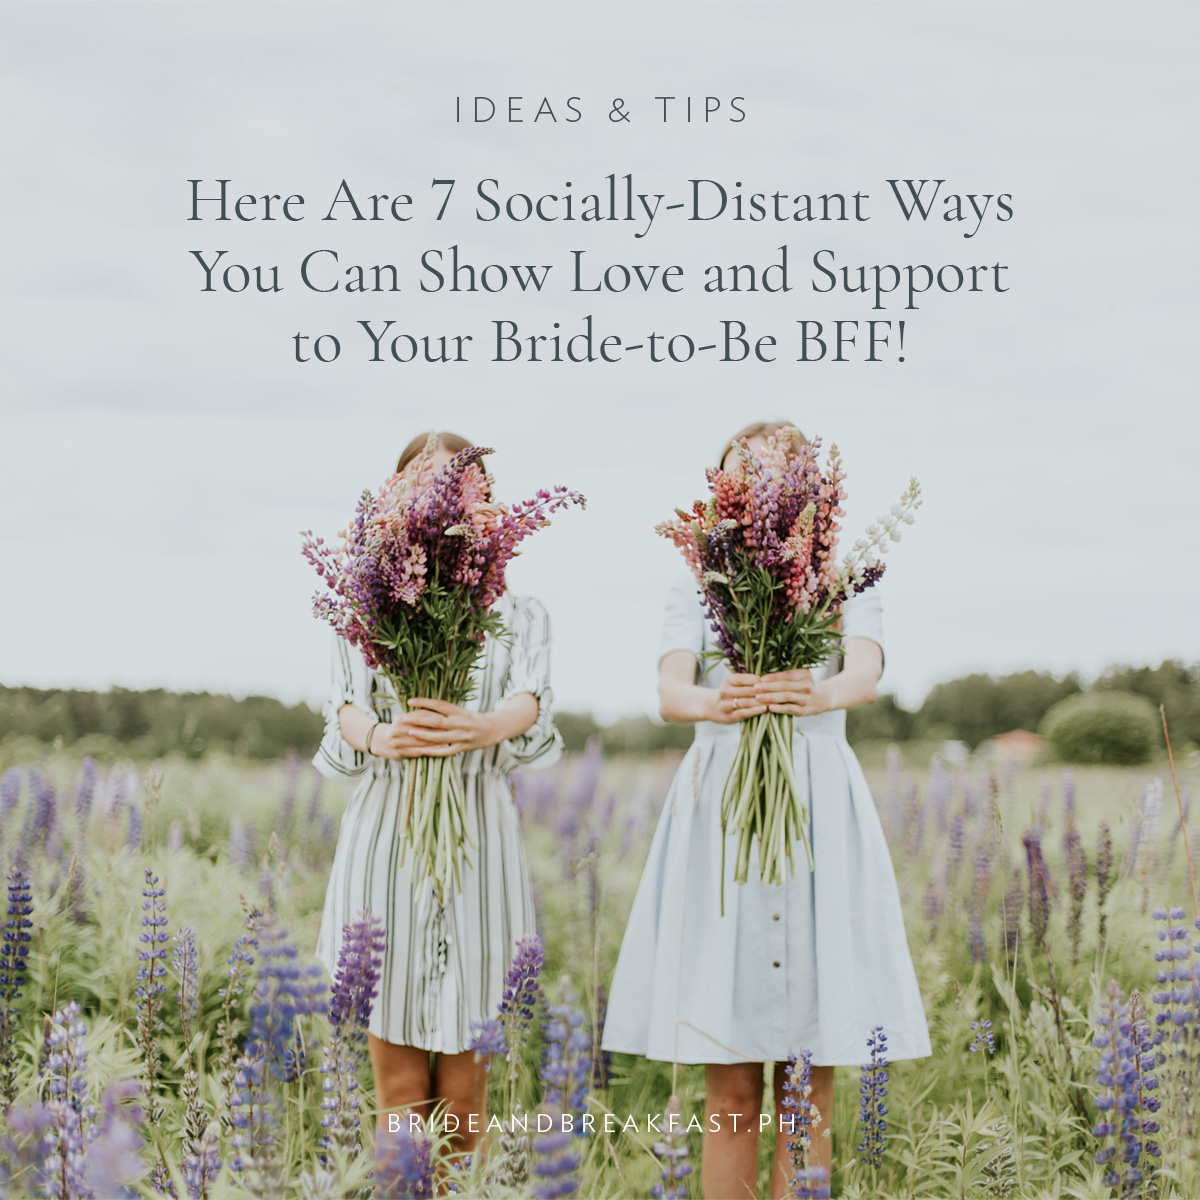 Here Are 7 Socially-Distant Ways You Can Show Love and Support to Your Bride-to-Be BFF!